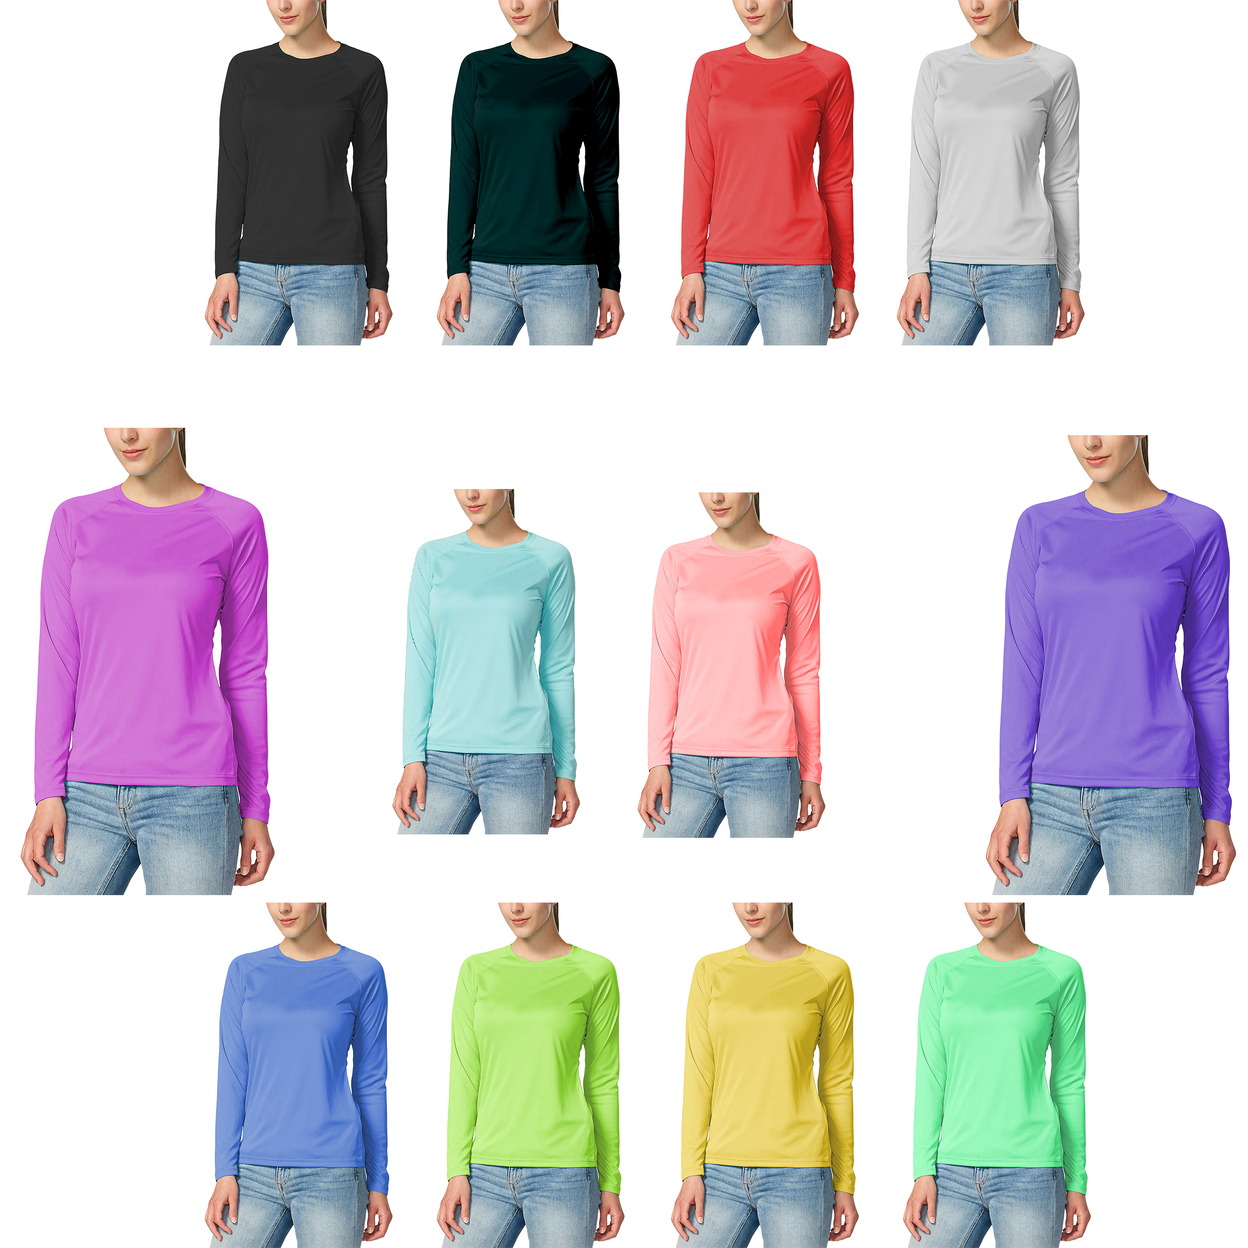 6-Pack: Women's Dri-Fit Moisture-Wicking Breathable Long Sleeve T-Shirt - X-large